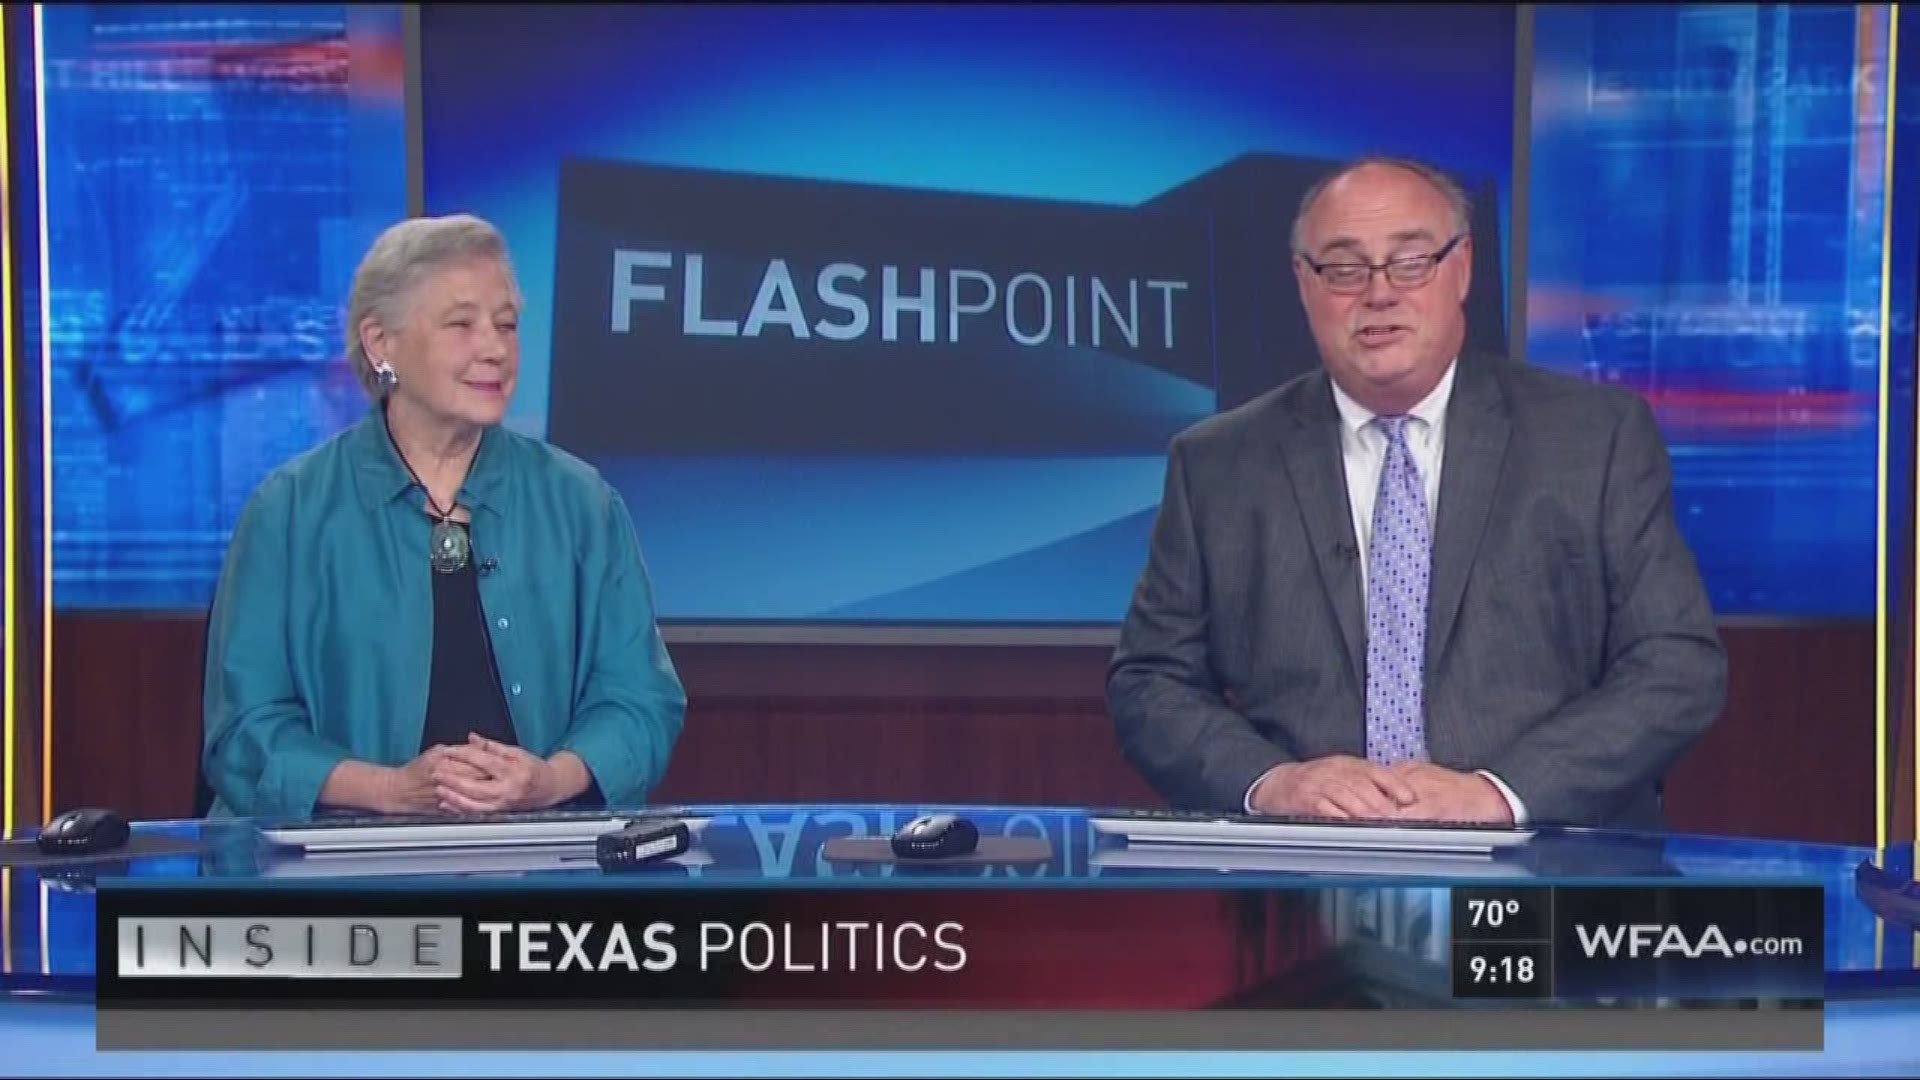 Each week, Flashpoint is usually divided on the issues. But this week , Katie Sherrod really surprised Mark Davis when she said that Dallas is safer with the NRA in town. Here's their conversation on the controversial convention. From the right,  Mark Dav